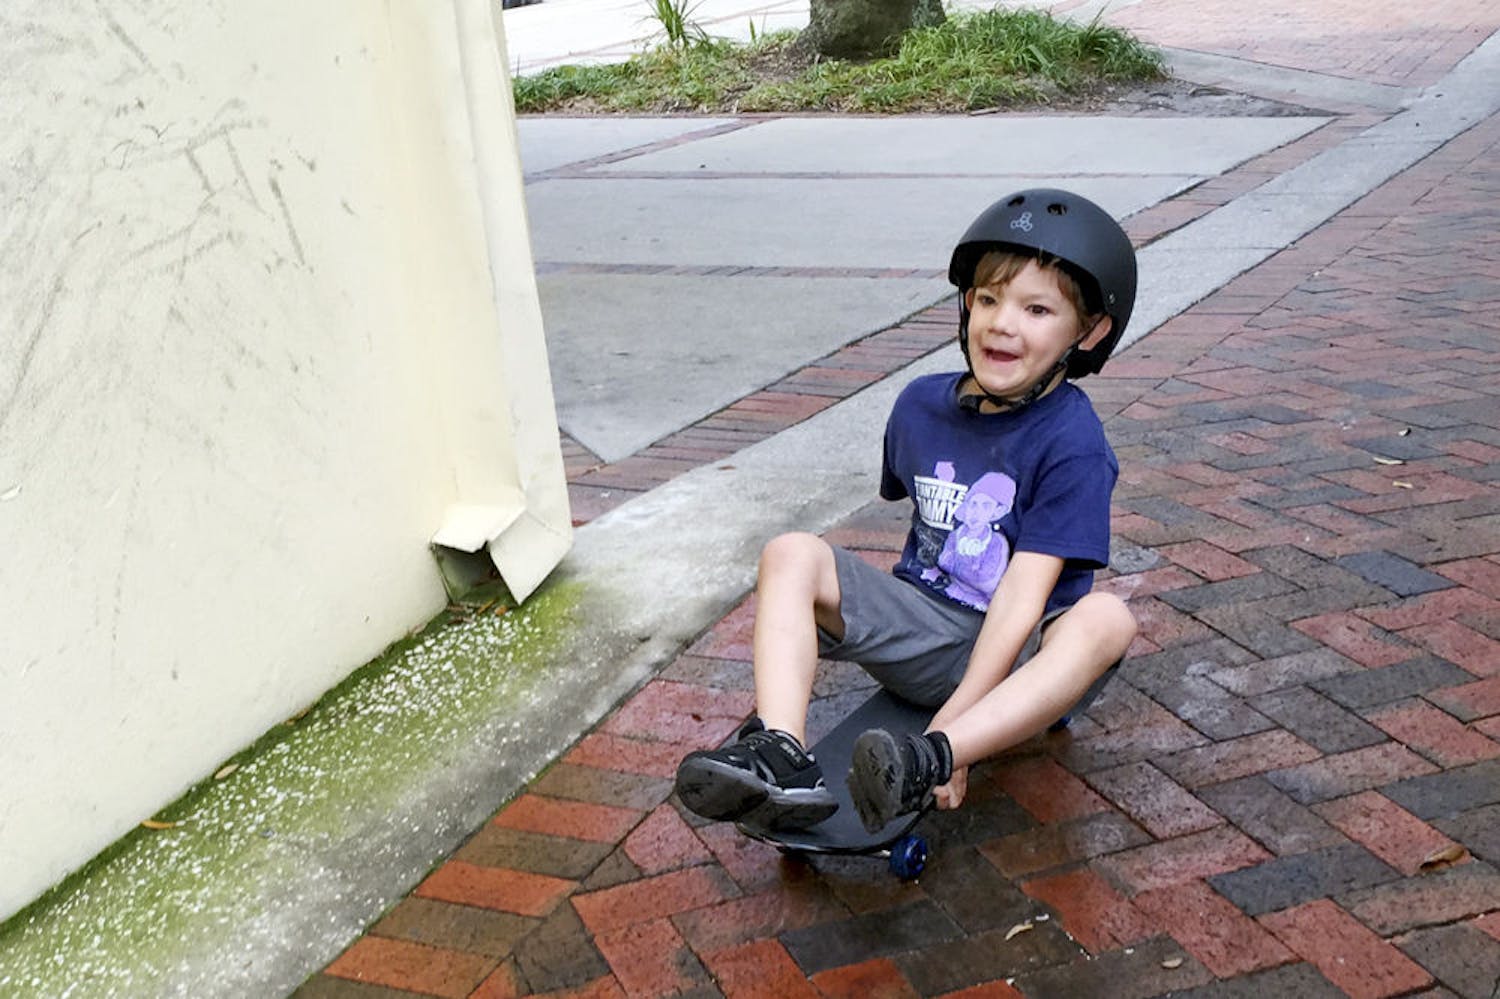 Aedyn Martinez, 6, rides his skateboard next to the Alachua County Public Library on Sunday morning. Aedyn was attending Active Streets, an event which closed nine blocks of University Avenue so that people could enjoy the streets without moving vehicles.